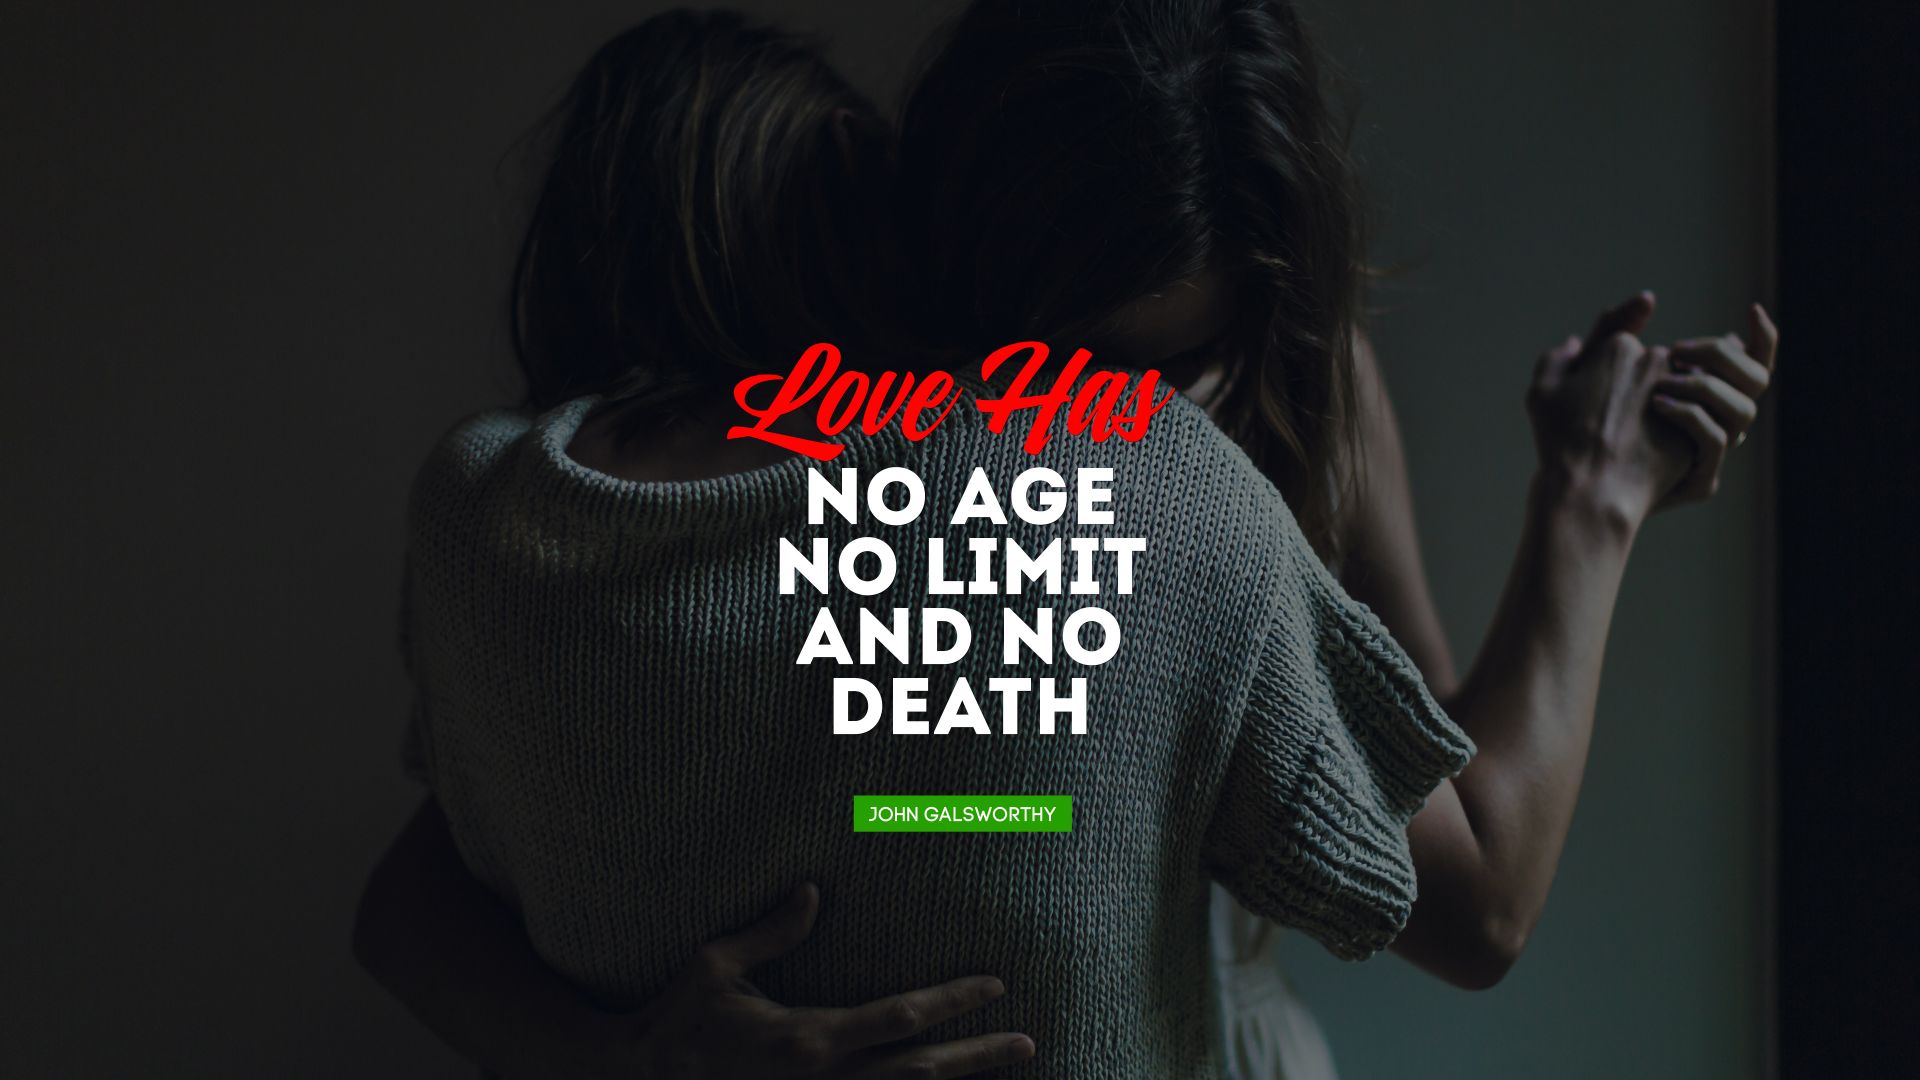 Love has no age, no limit; and no death. - Quote by John Galsworthy